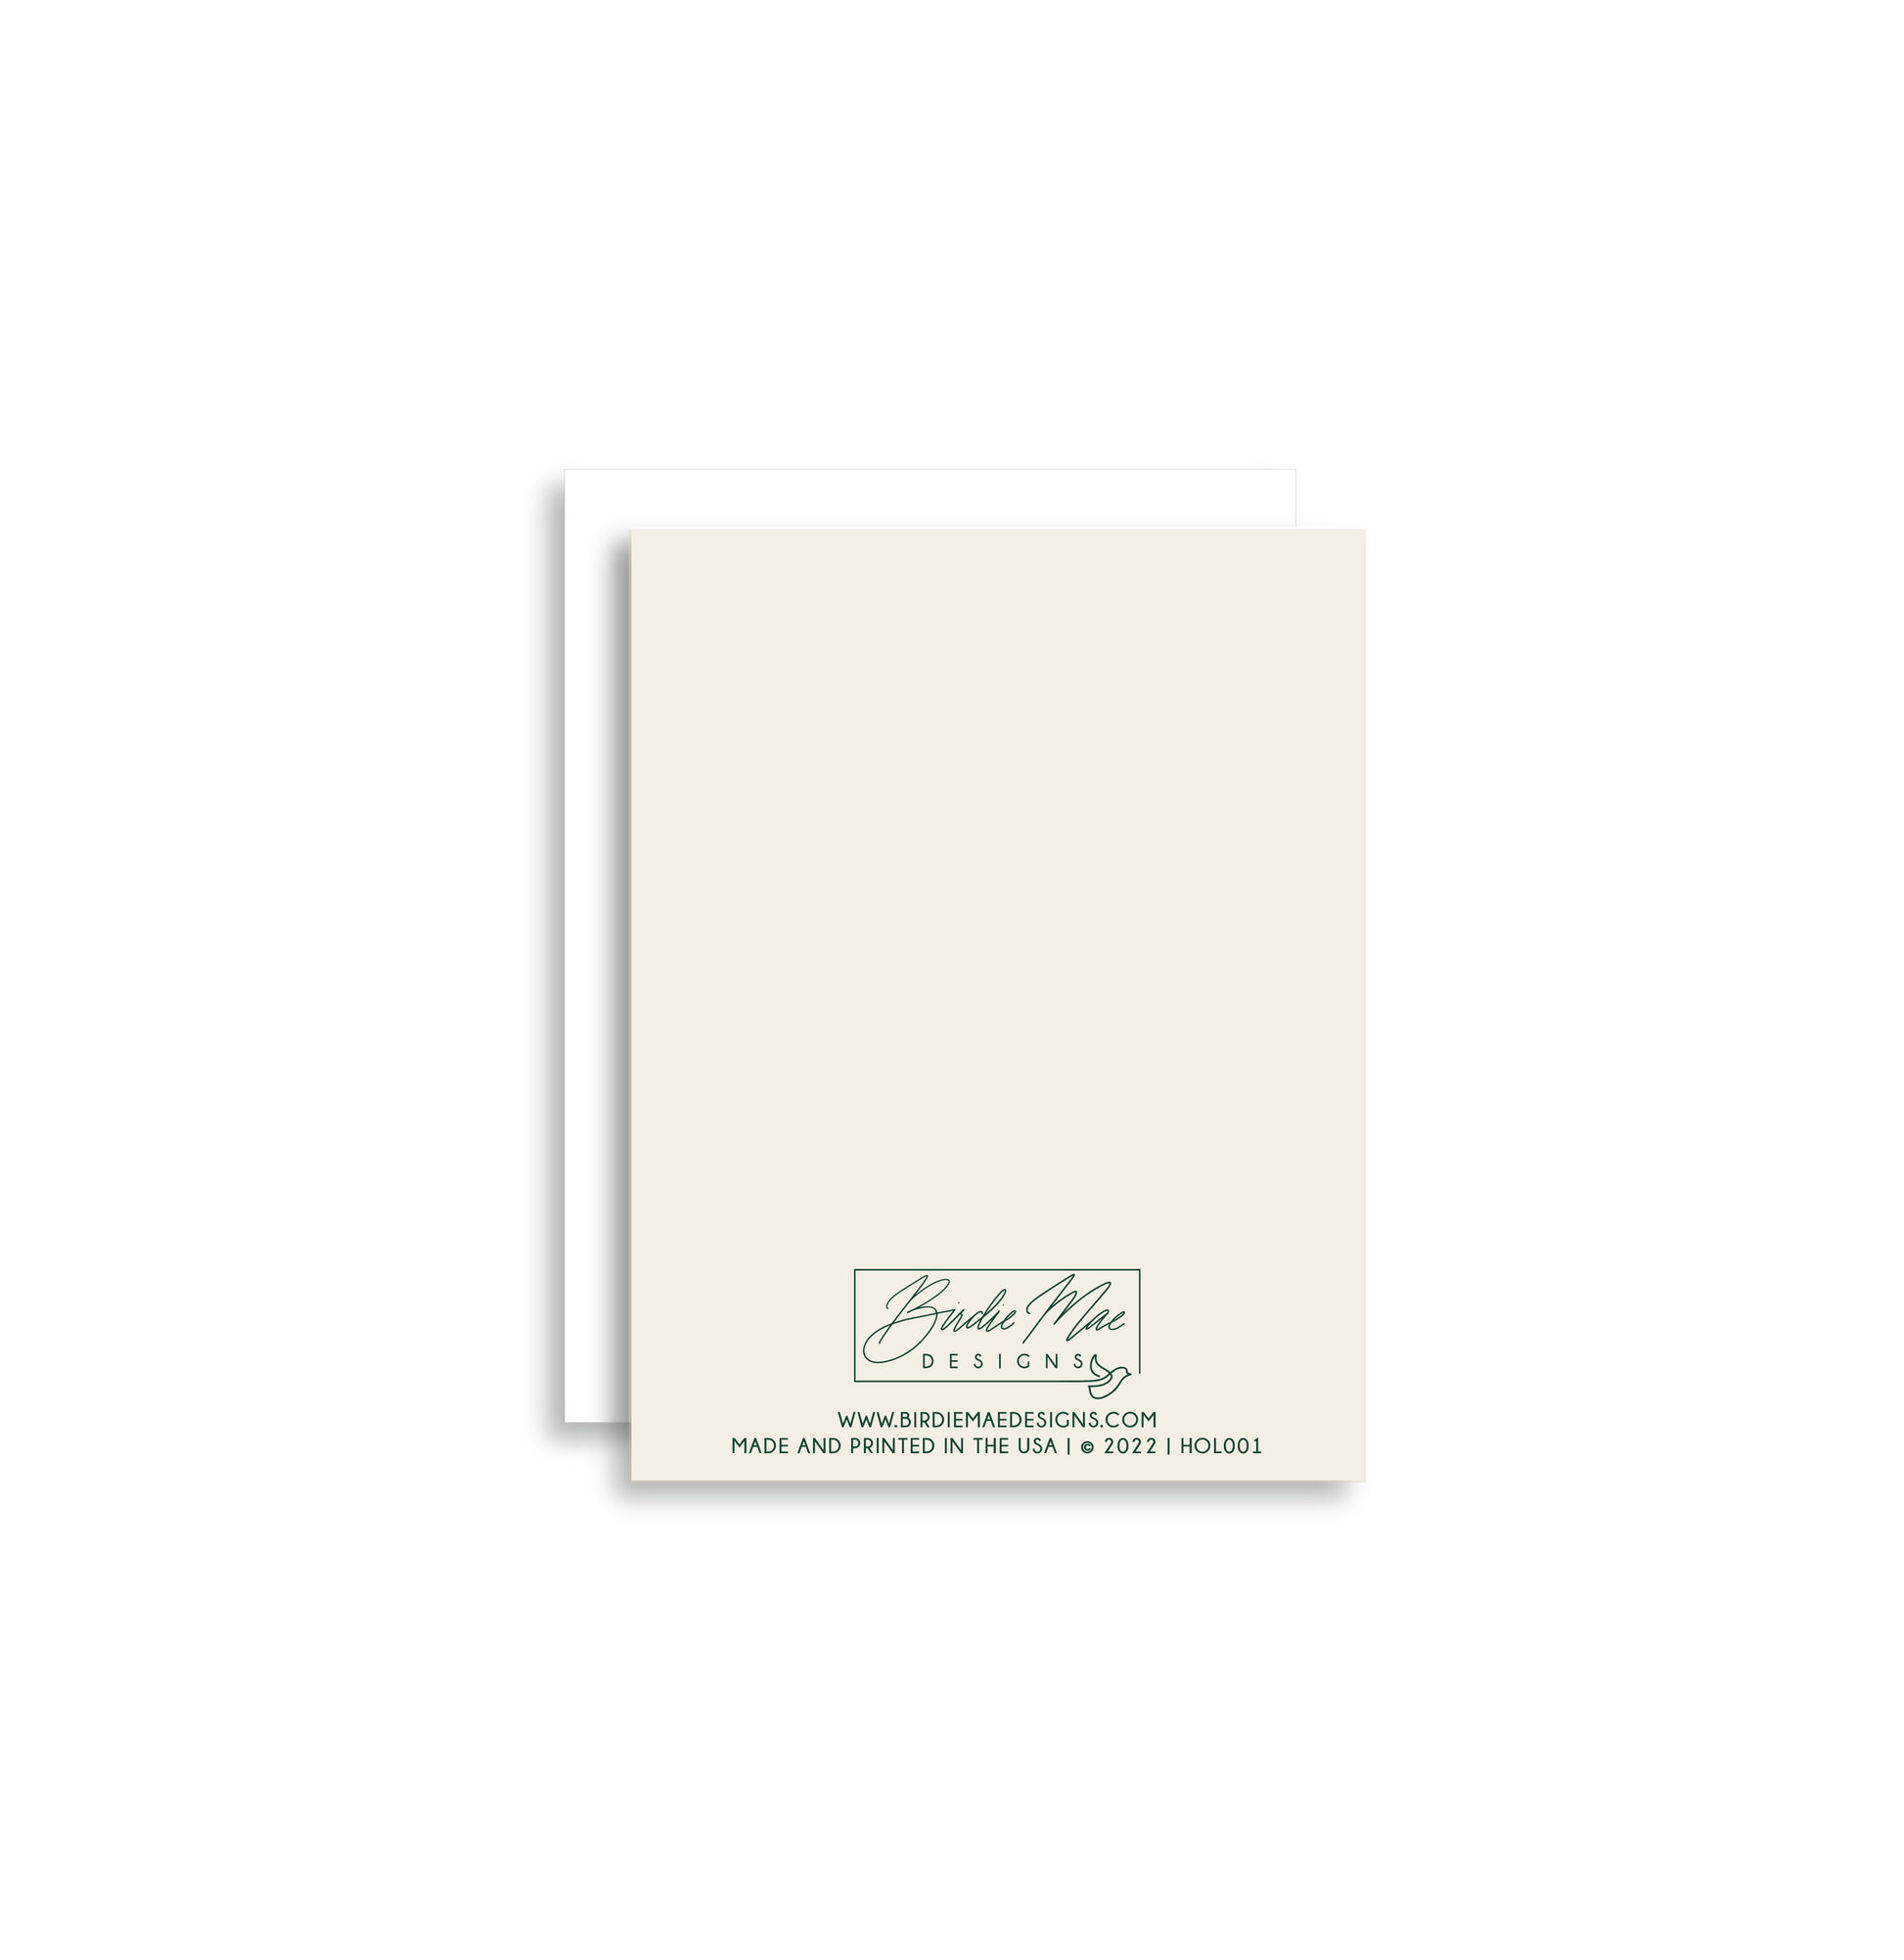 "Good Tidings of Great Joy" Christmas Greeting Card is a festive way to bring joy during the holiday season. Each card is folded to 4.25" tall by 5.5" wide, is blank inside and comes with a matching white envelope. Cards are packaged in cellophane sleeves. 